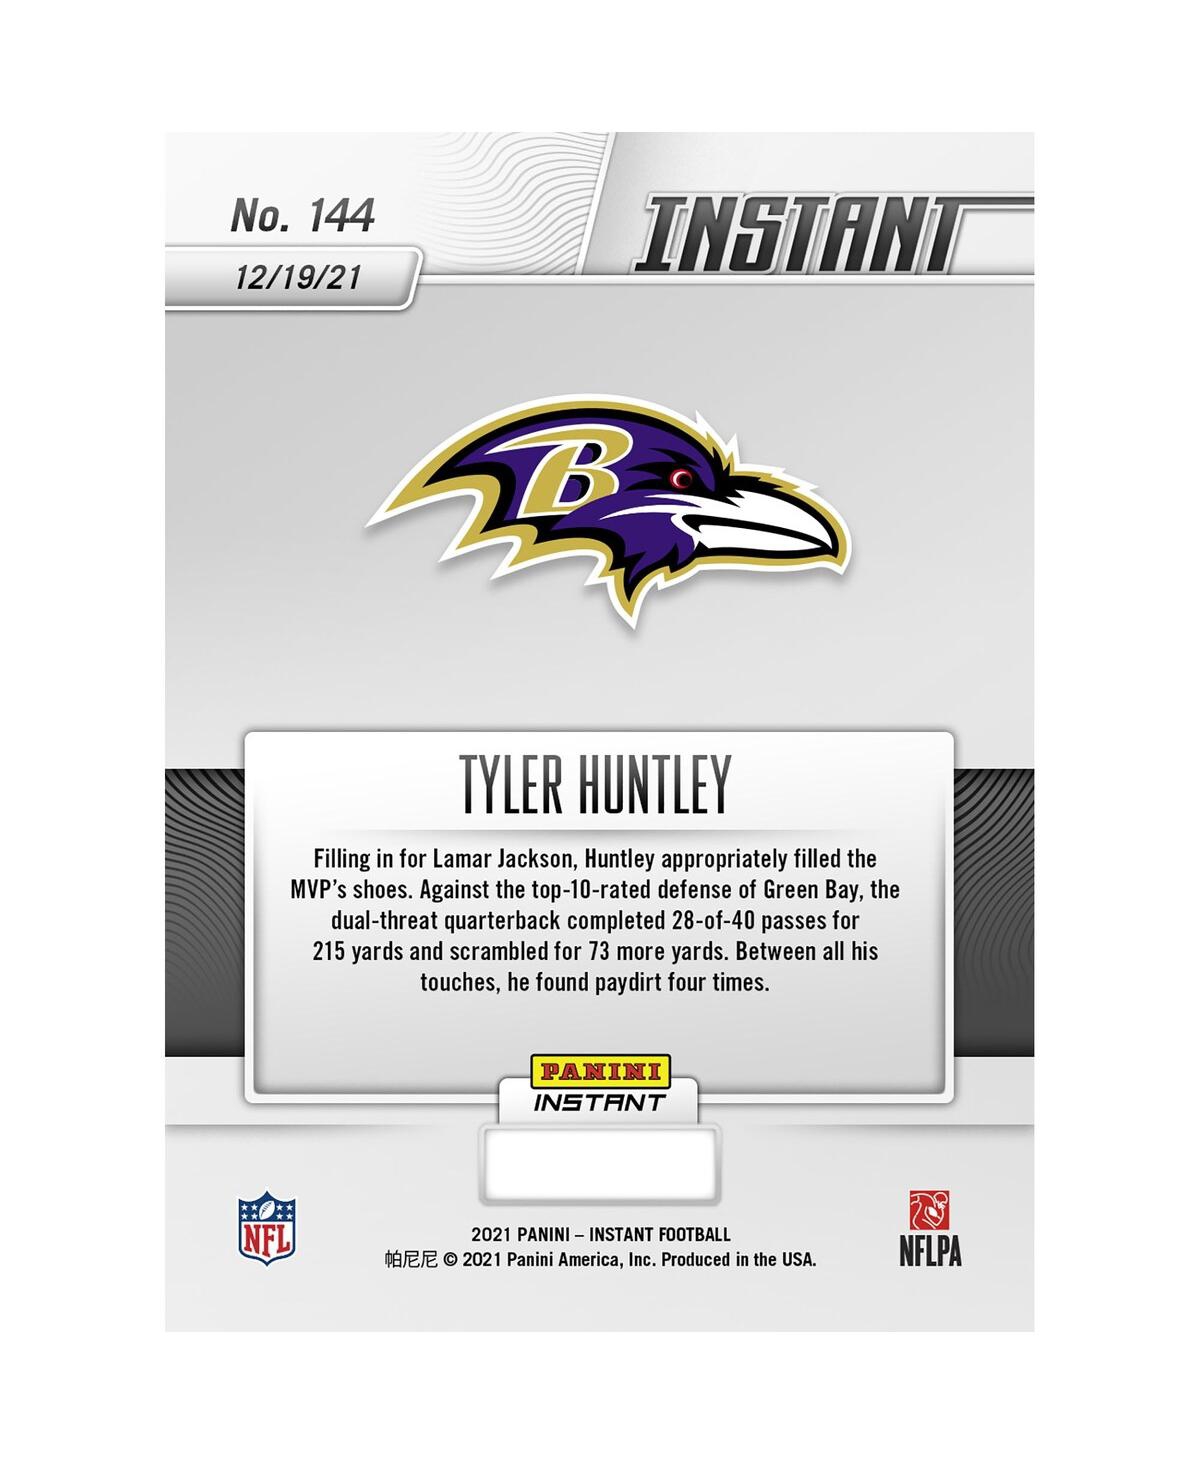 Shop Panini America Tyler Huntley Baltimore Ravens Parallel  Instant Nfl Week 15 Huntley Dazzles With 4 To In Multi